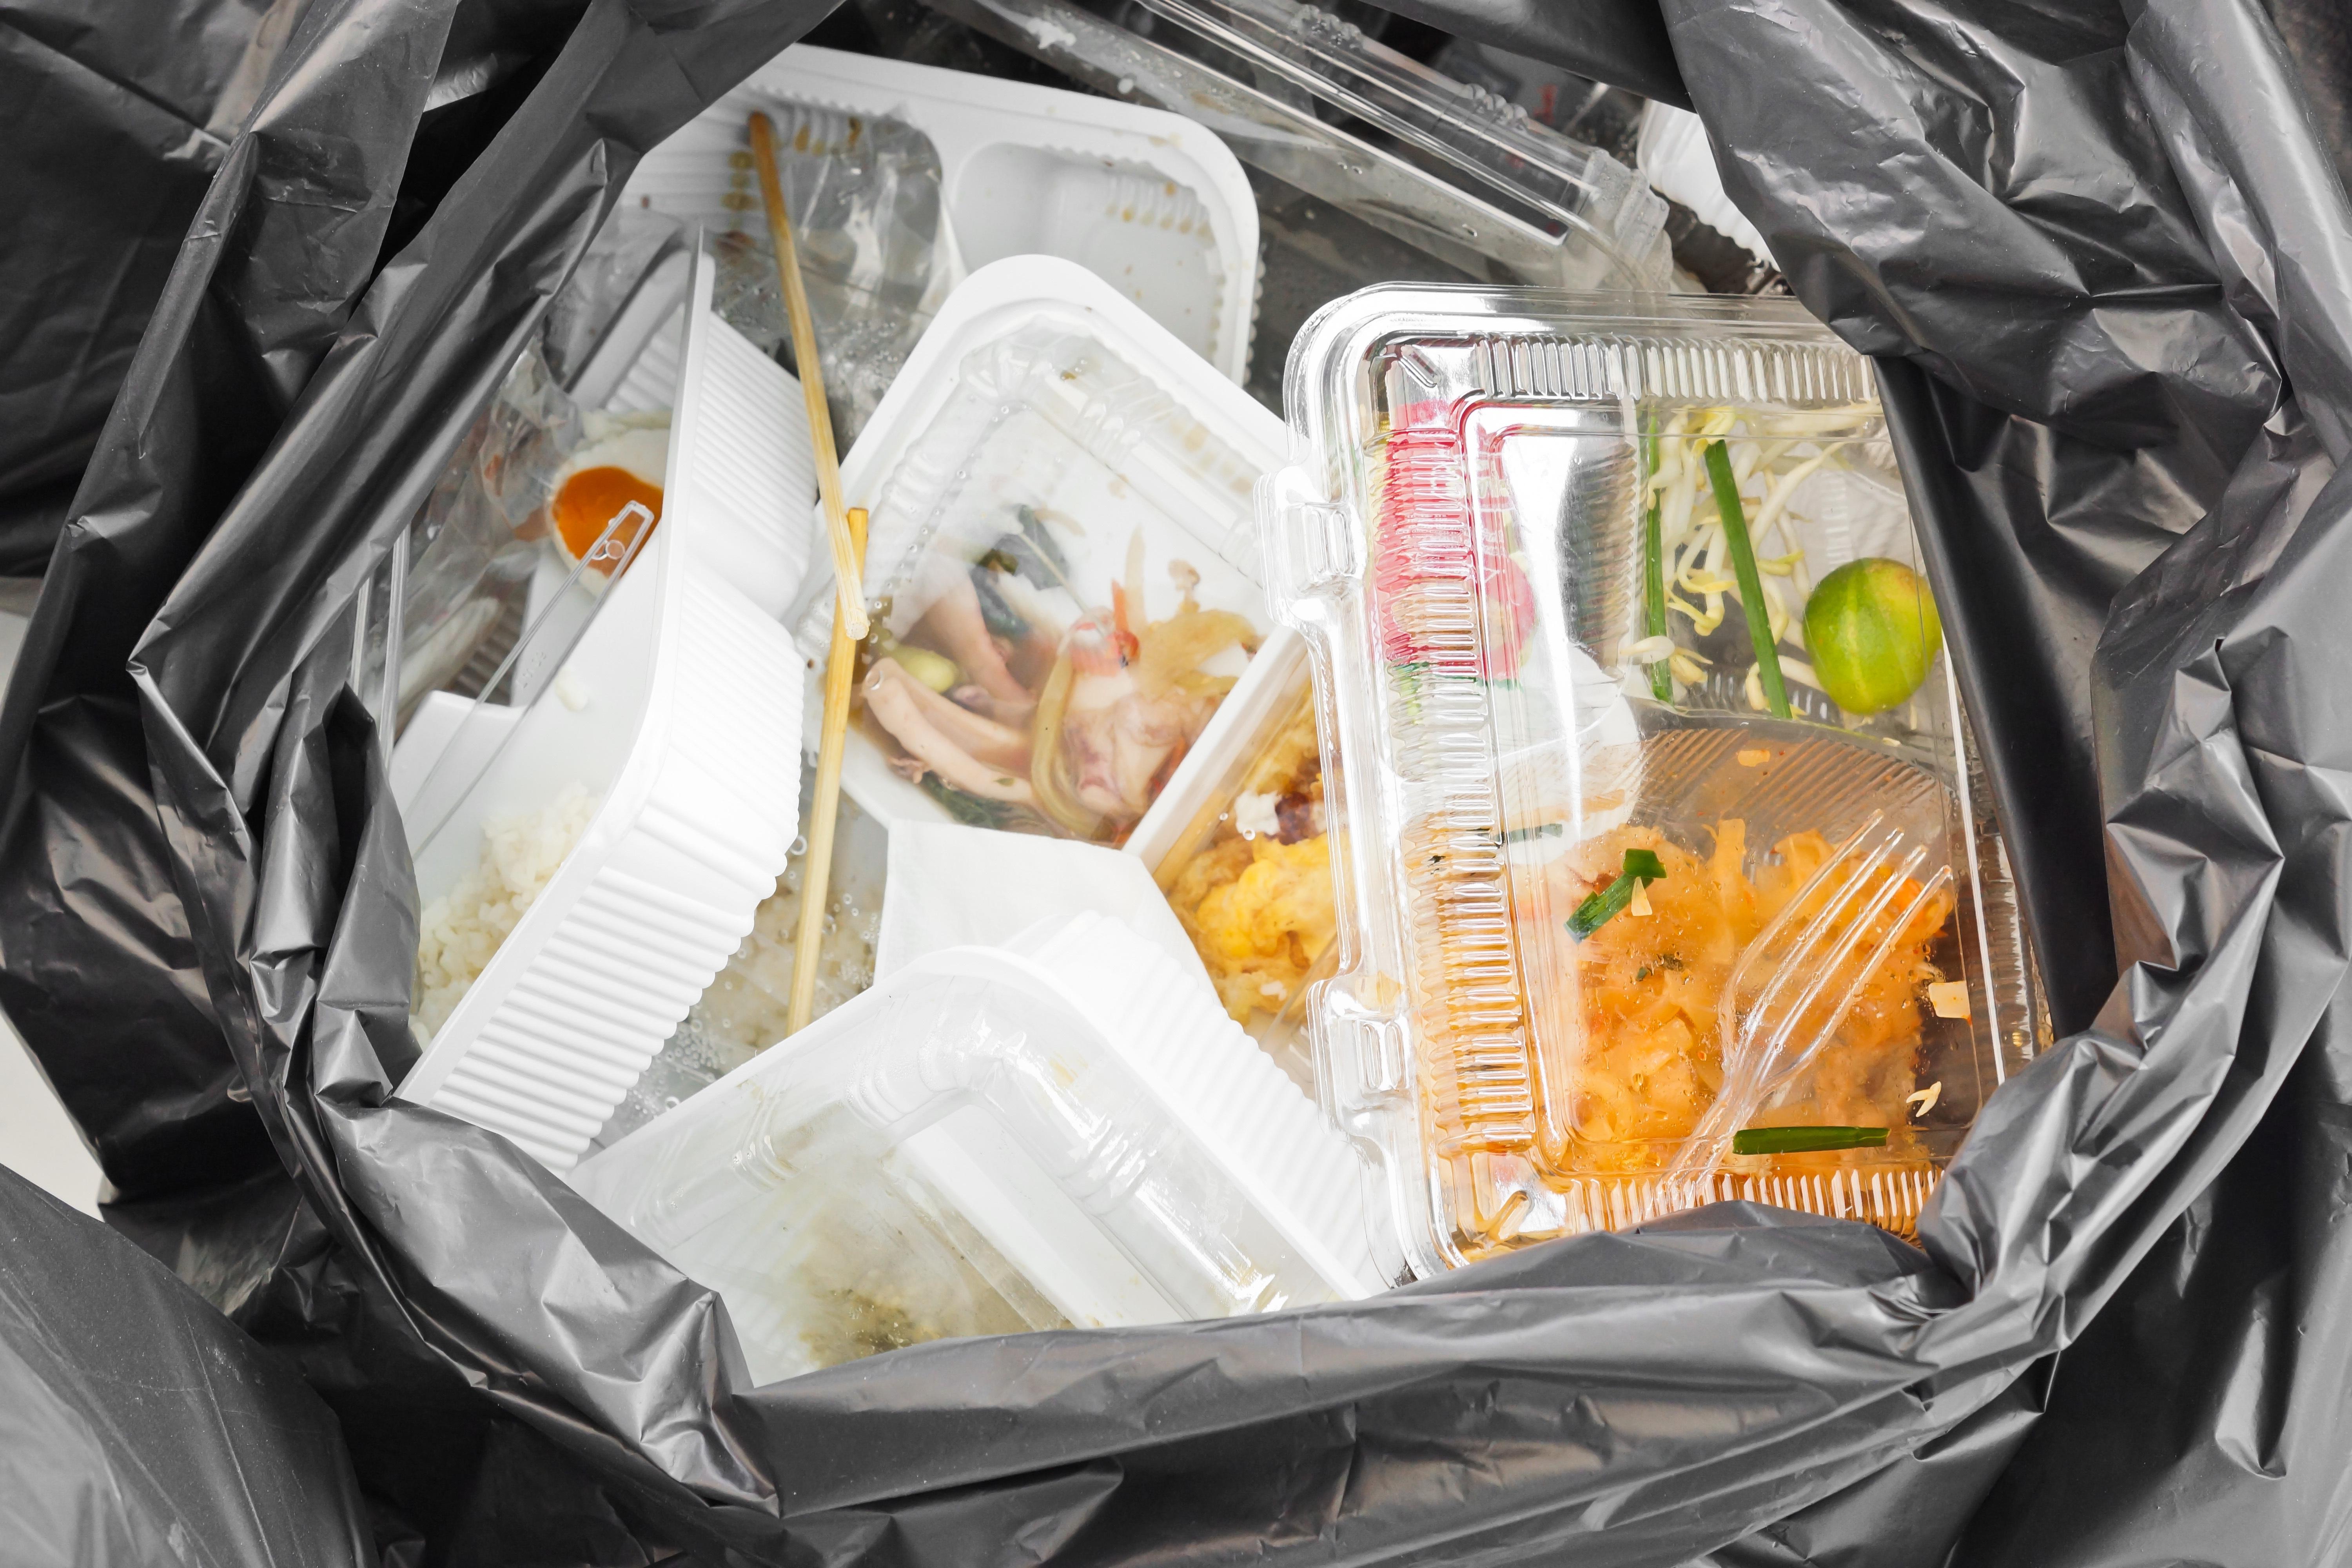 COVID-19 Increases the Amount of Infectious and Plastic Waste